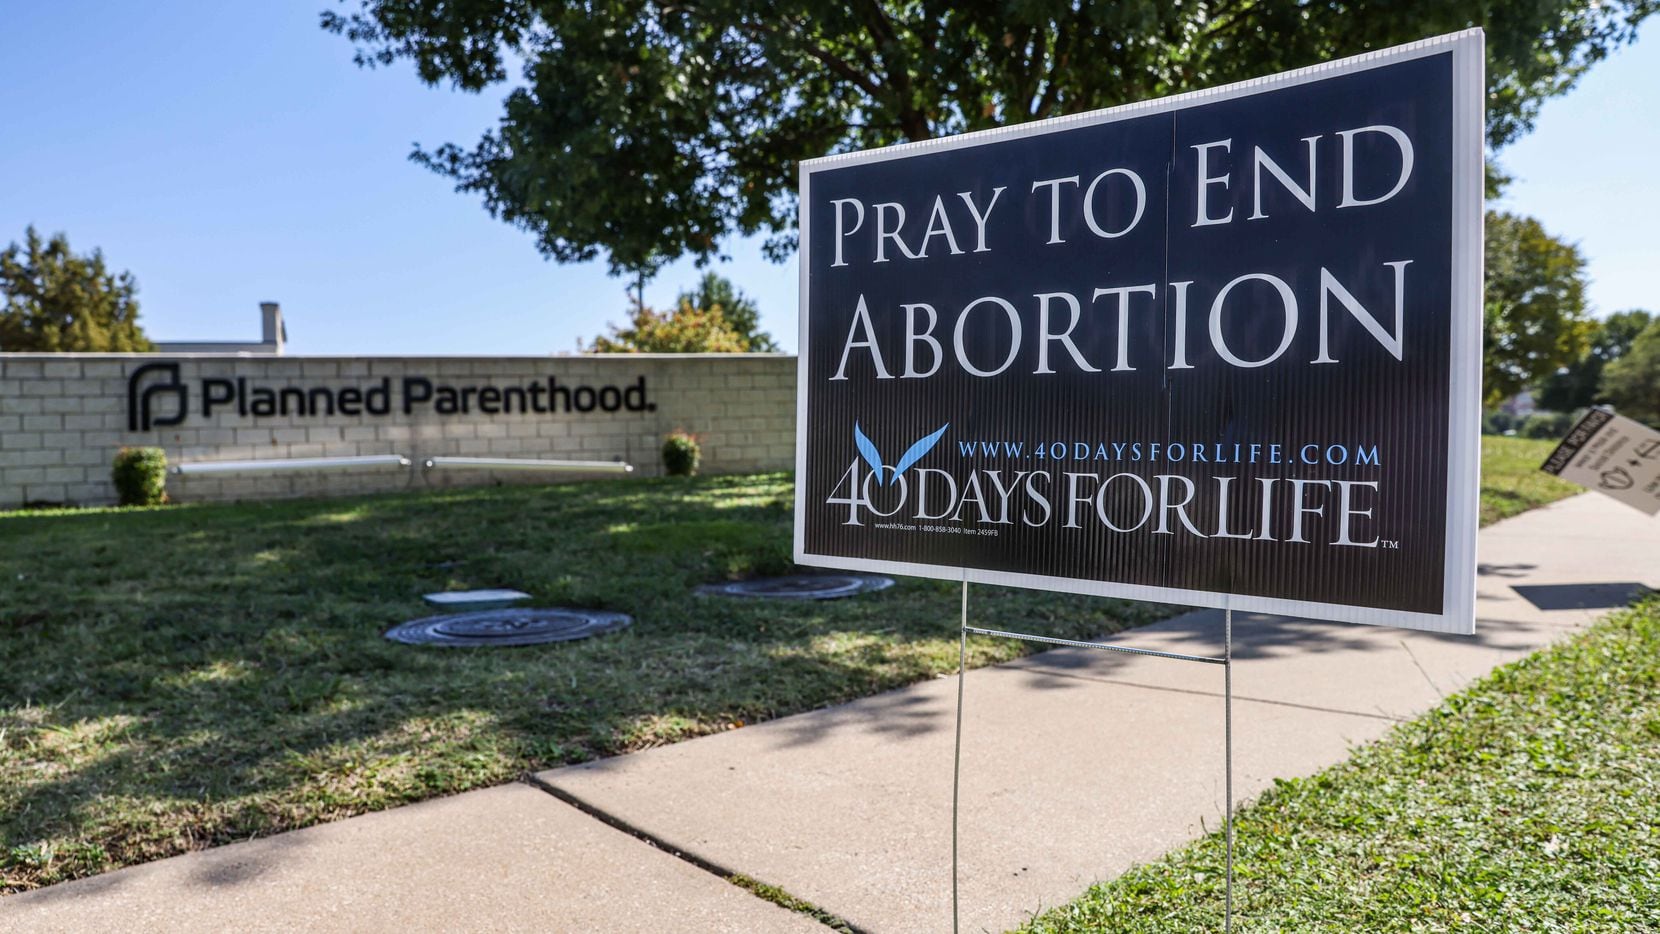 The number of abortions in Texas dropped almost 60% in Texas in the first month after the...